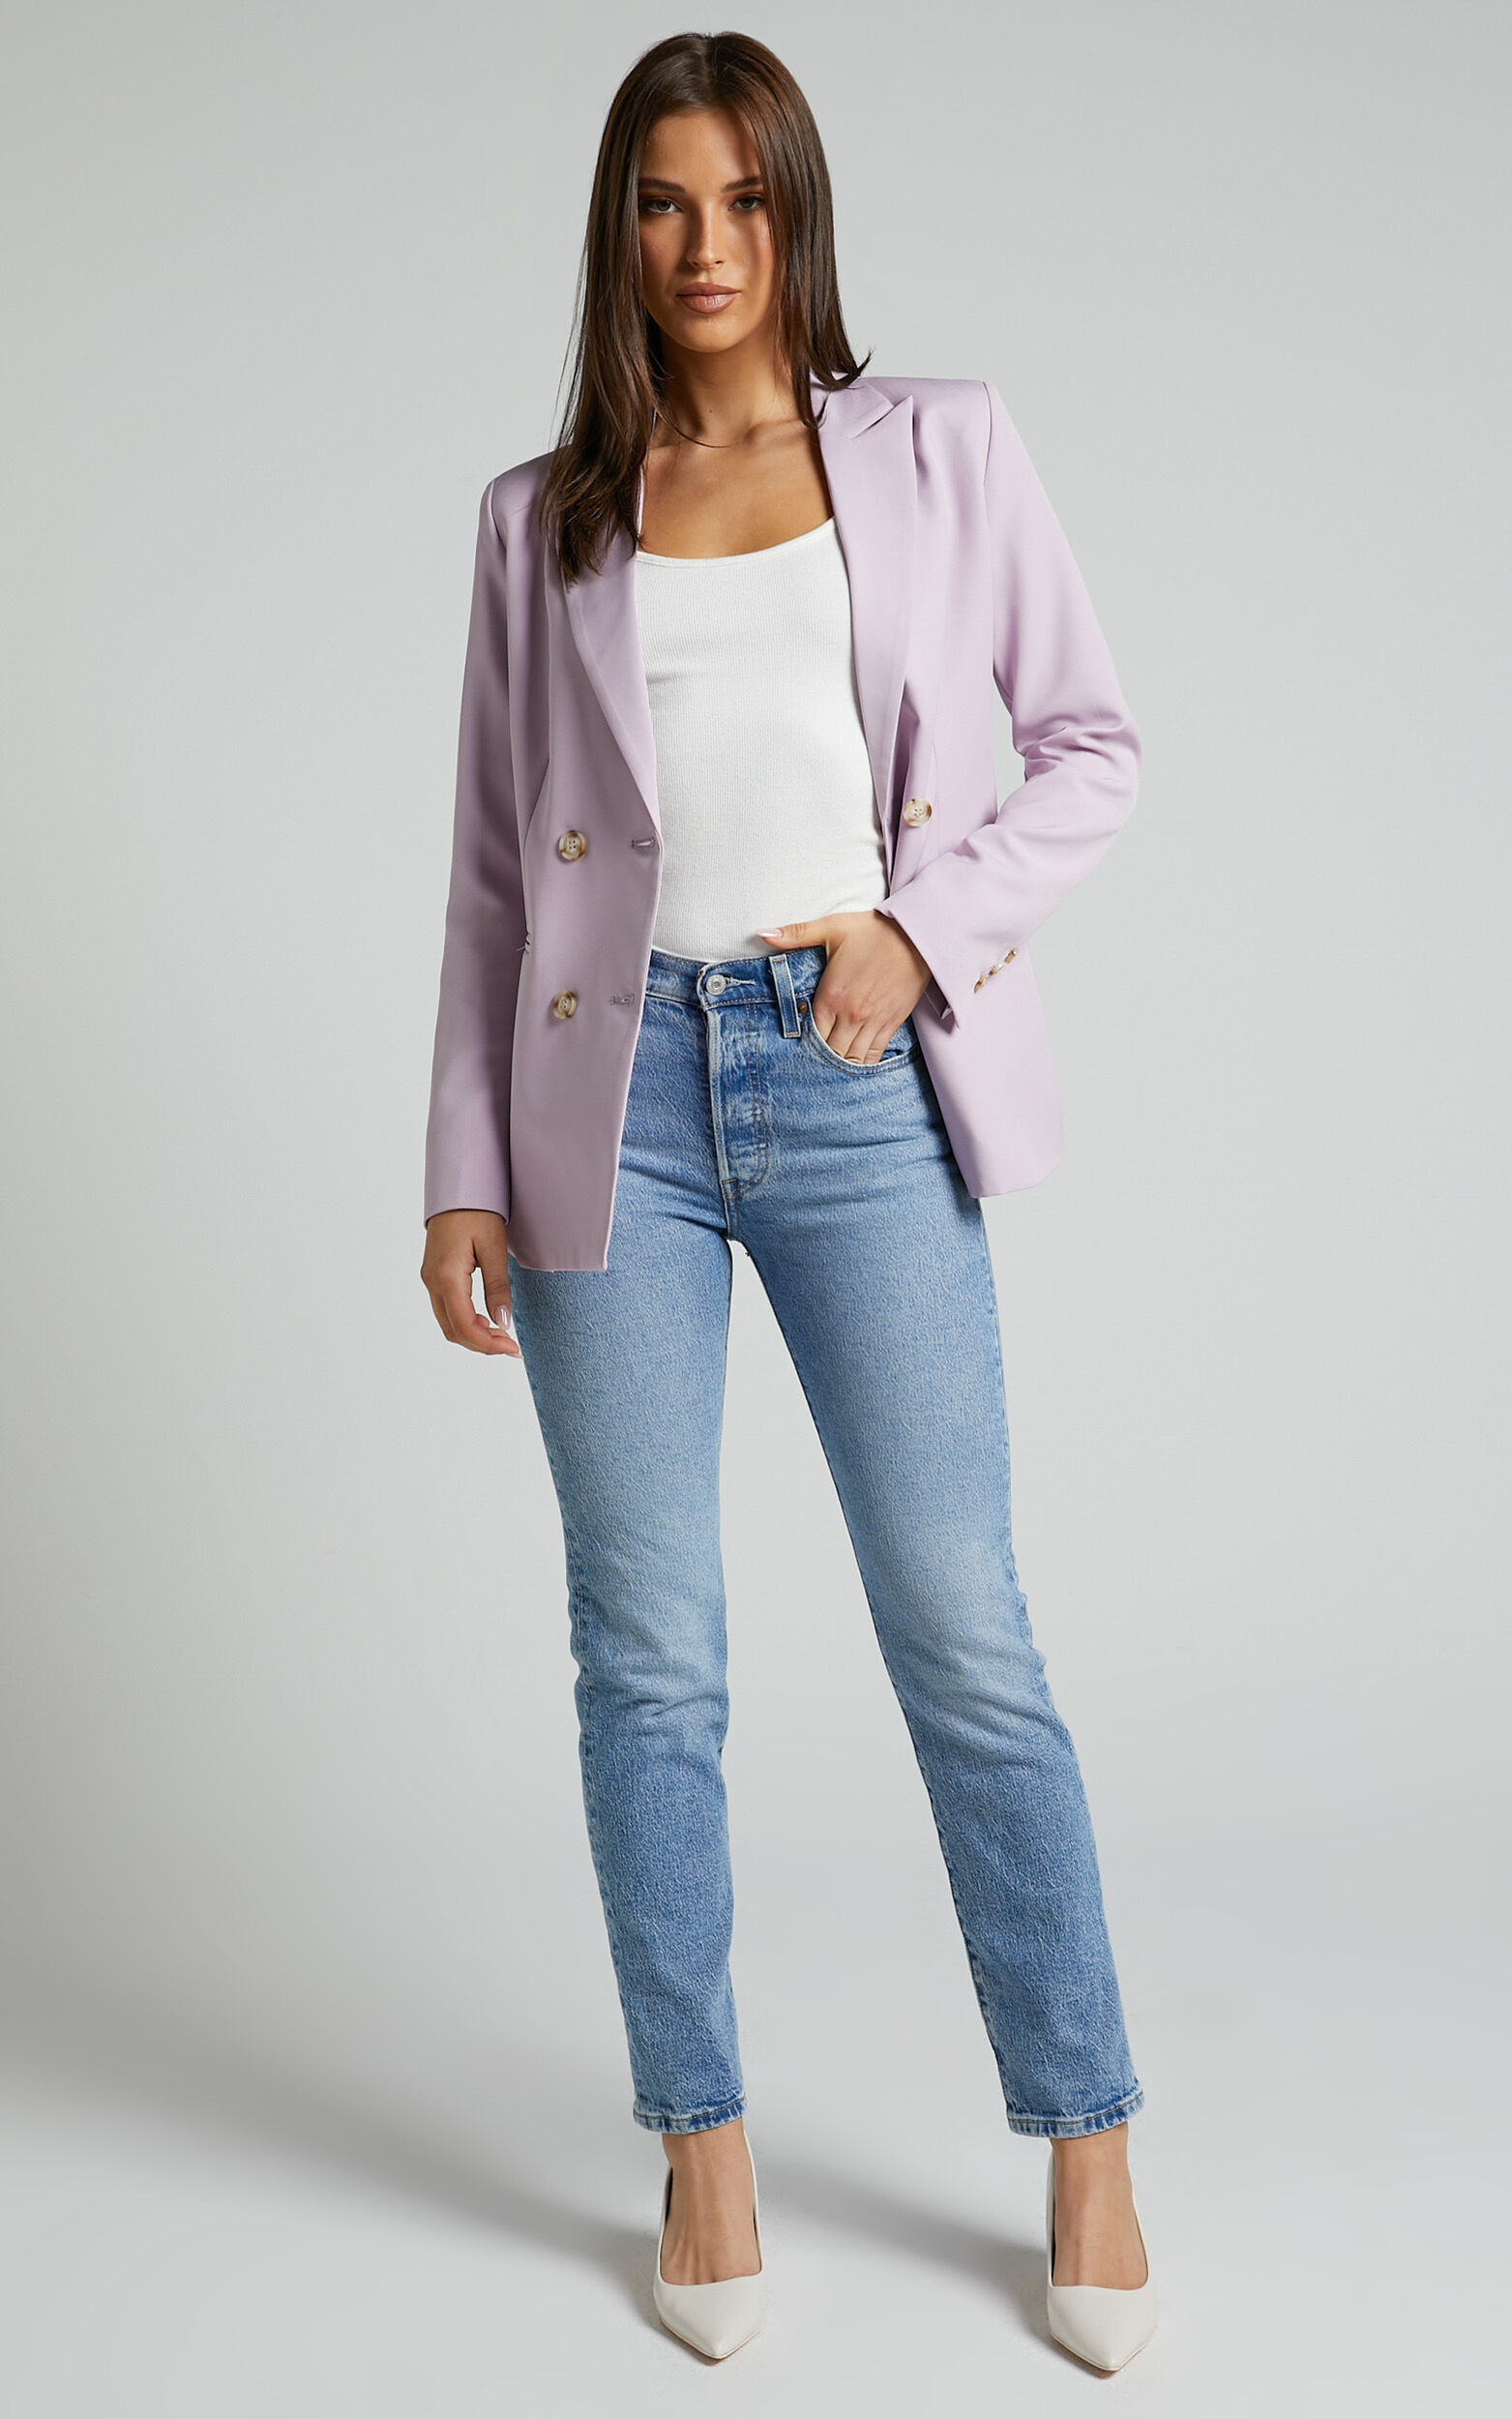 Allie Blazer - Double Breasted Blazer in Lilac - 04, PRP1